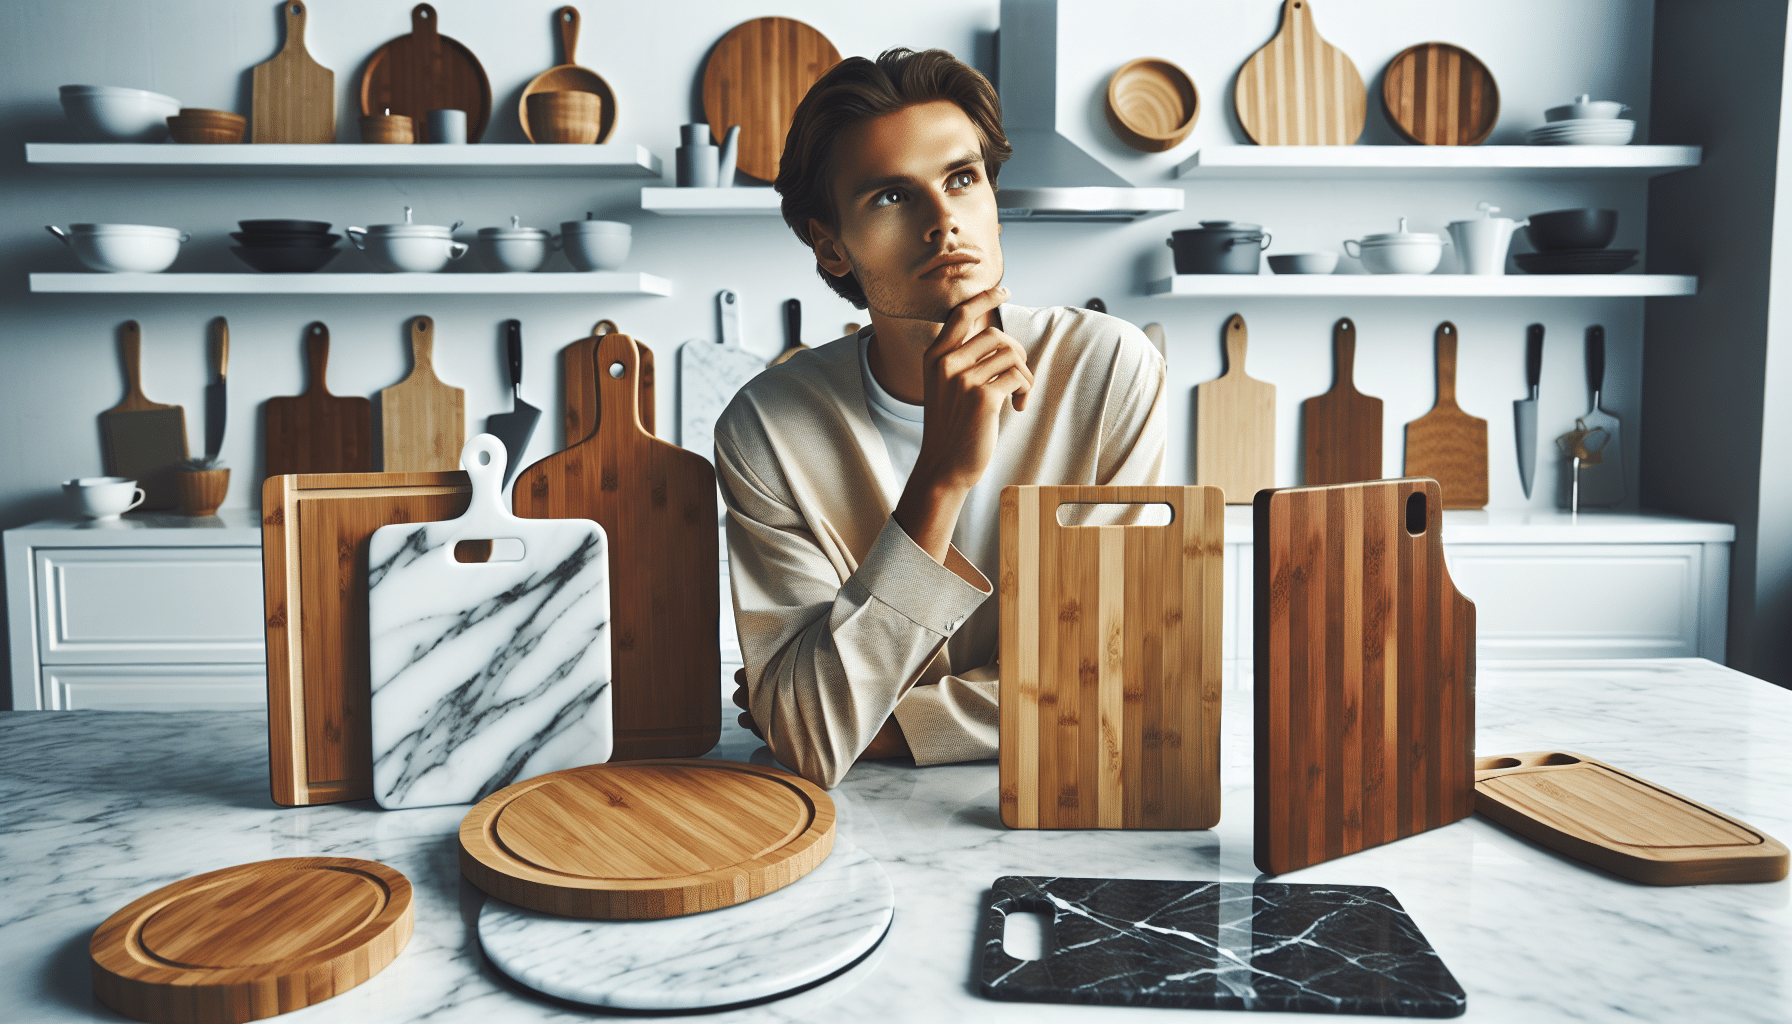 Person considering different cutting board materials and sizes